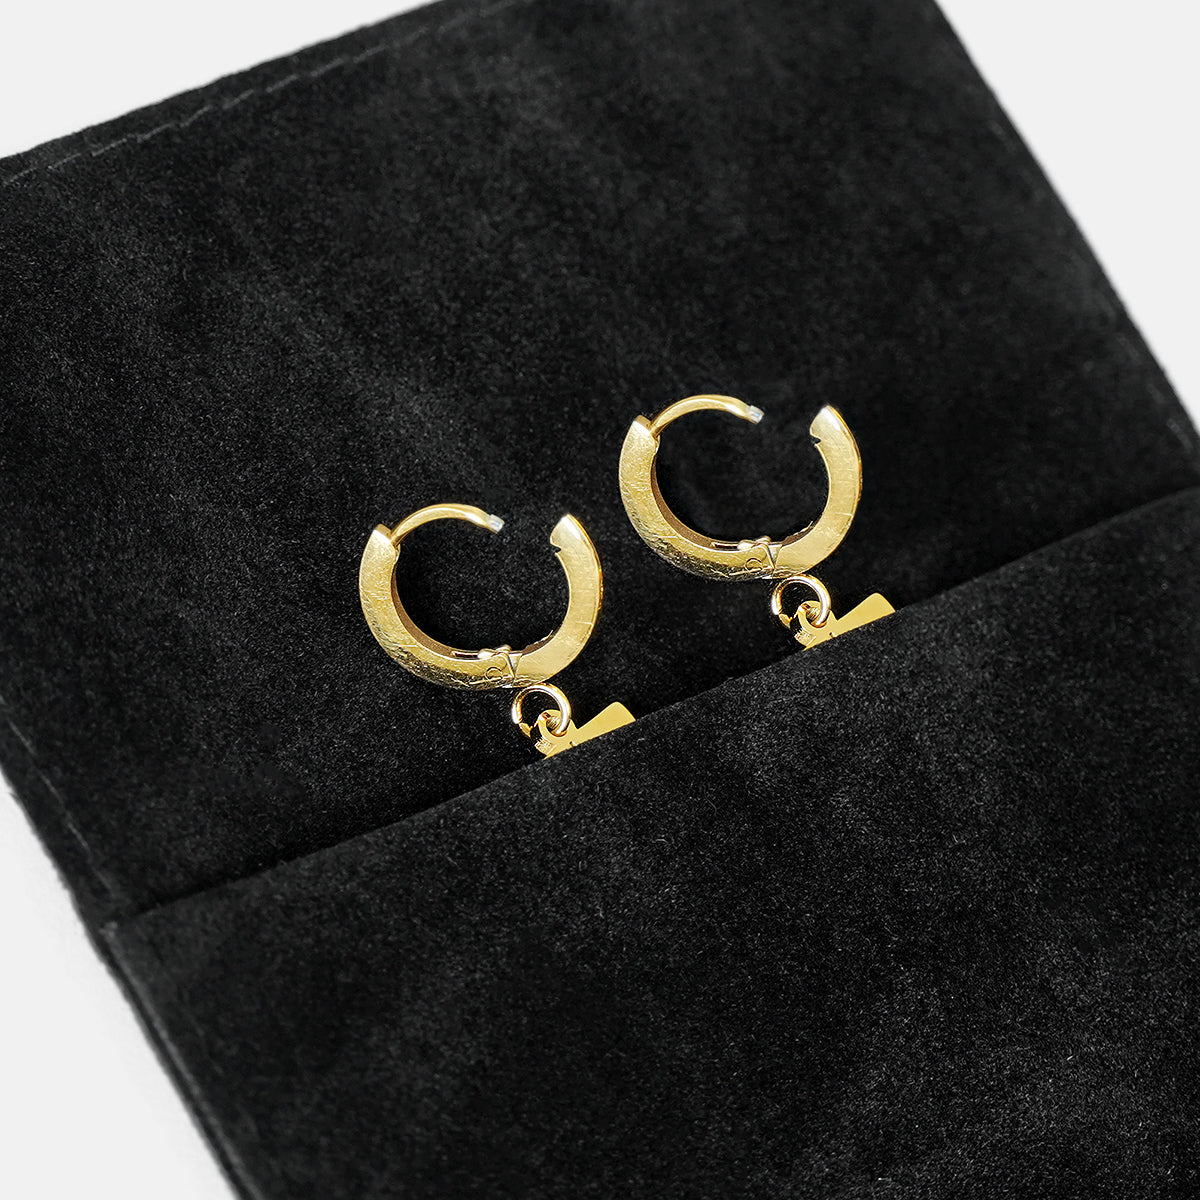 89 Number Earring - Gold Plated Stainless Steel